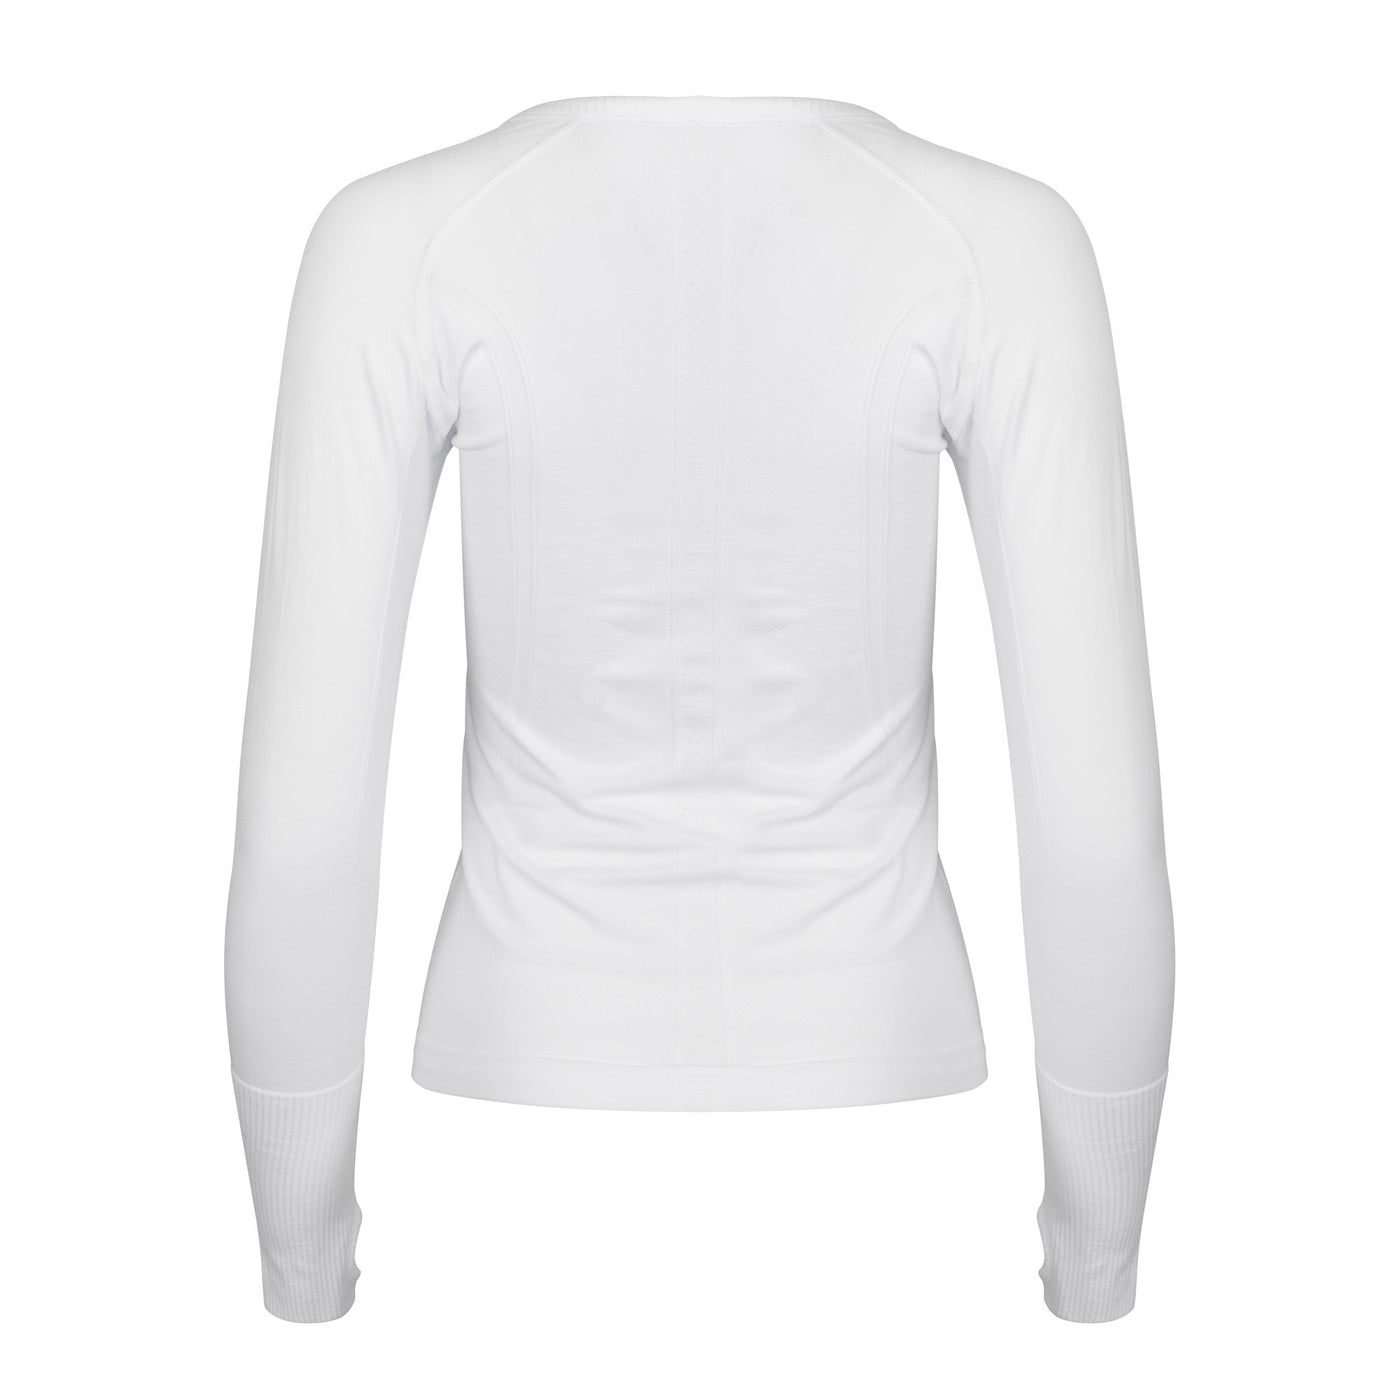 White Long Sleeve Vest Top - PREORDER